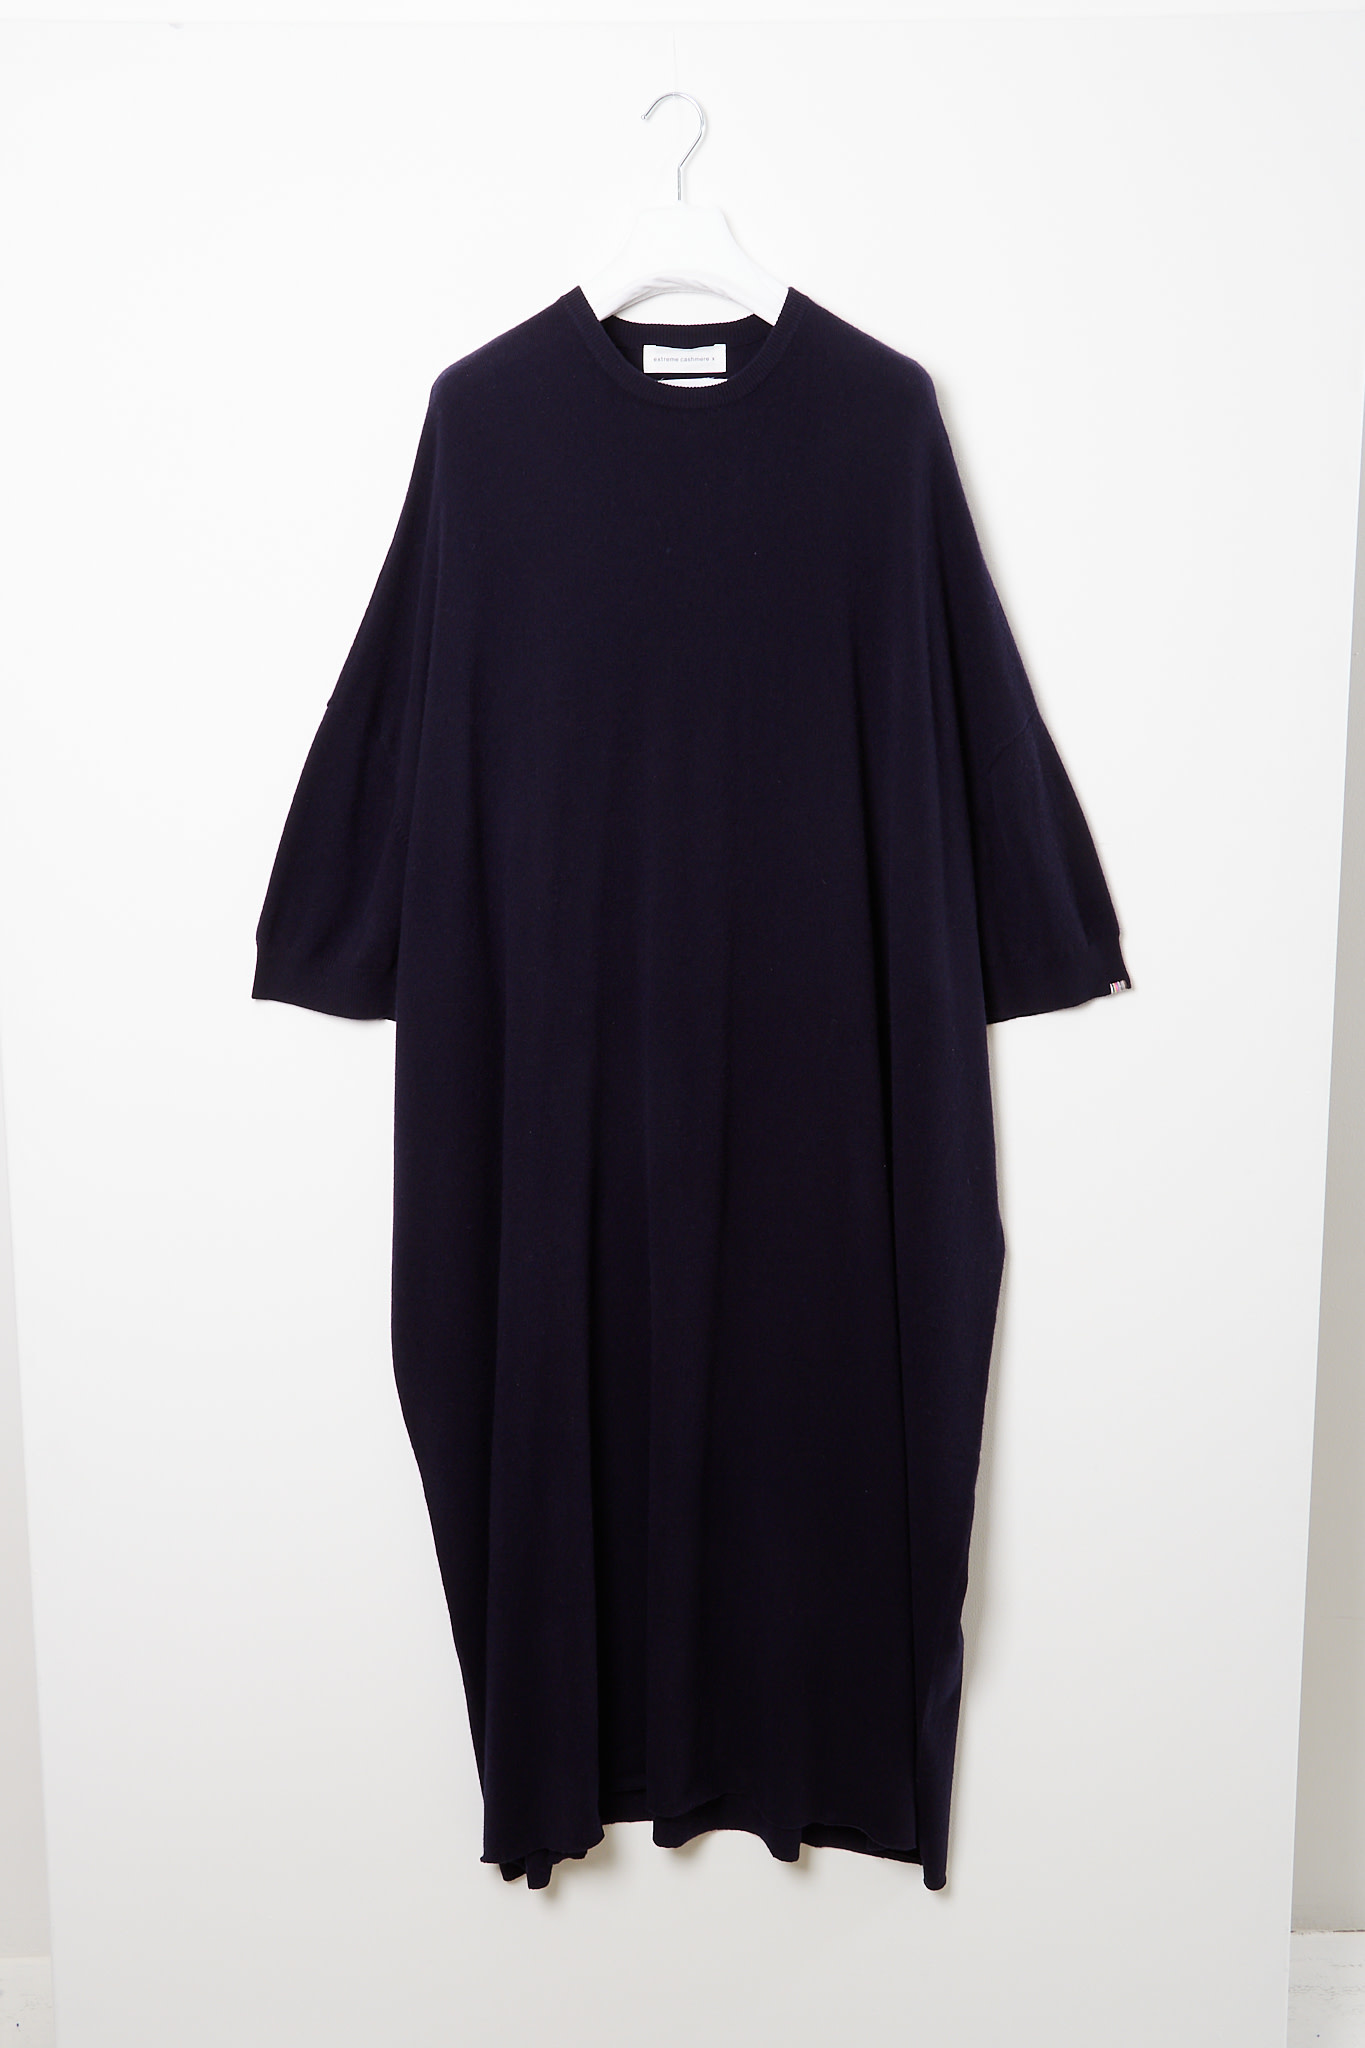 extreme cashmere Ghost dress